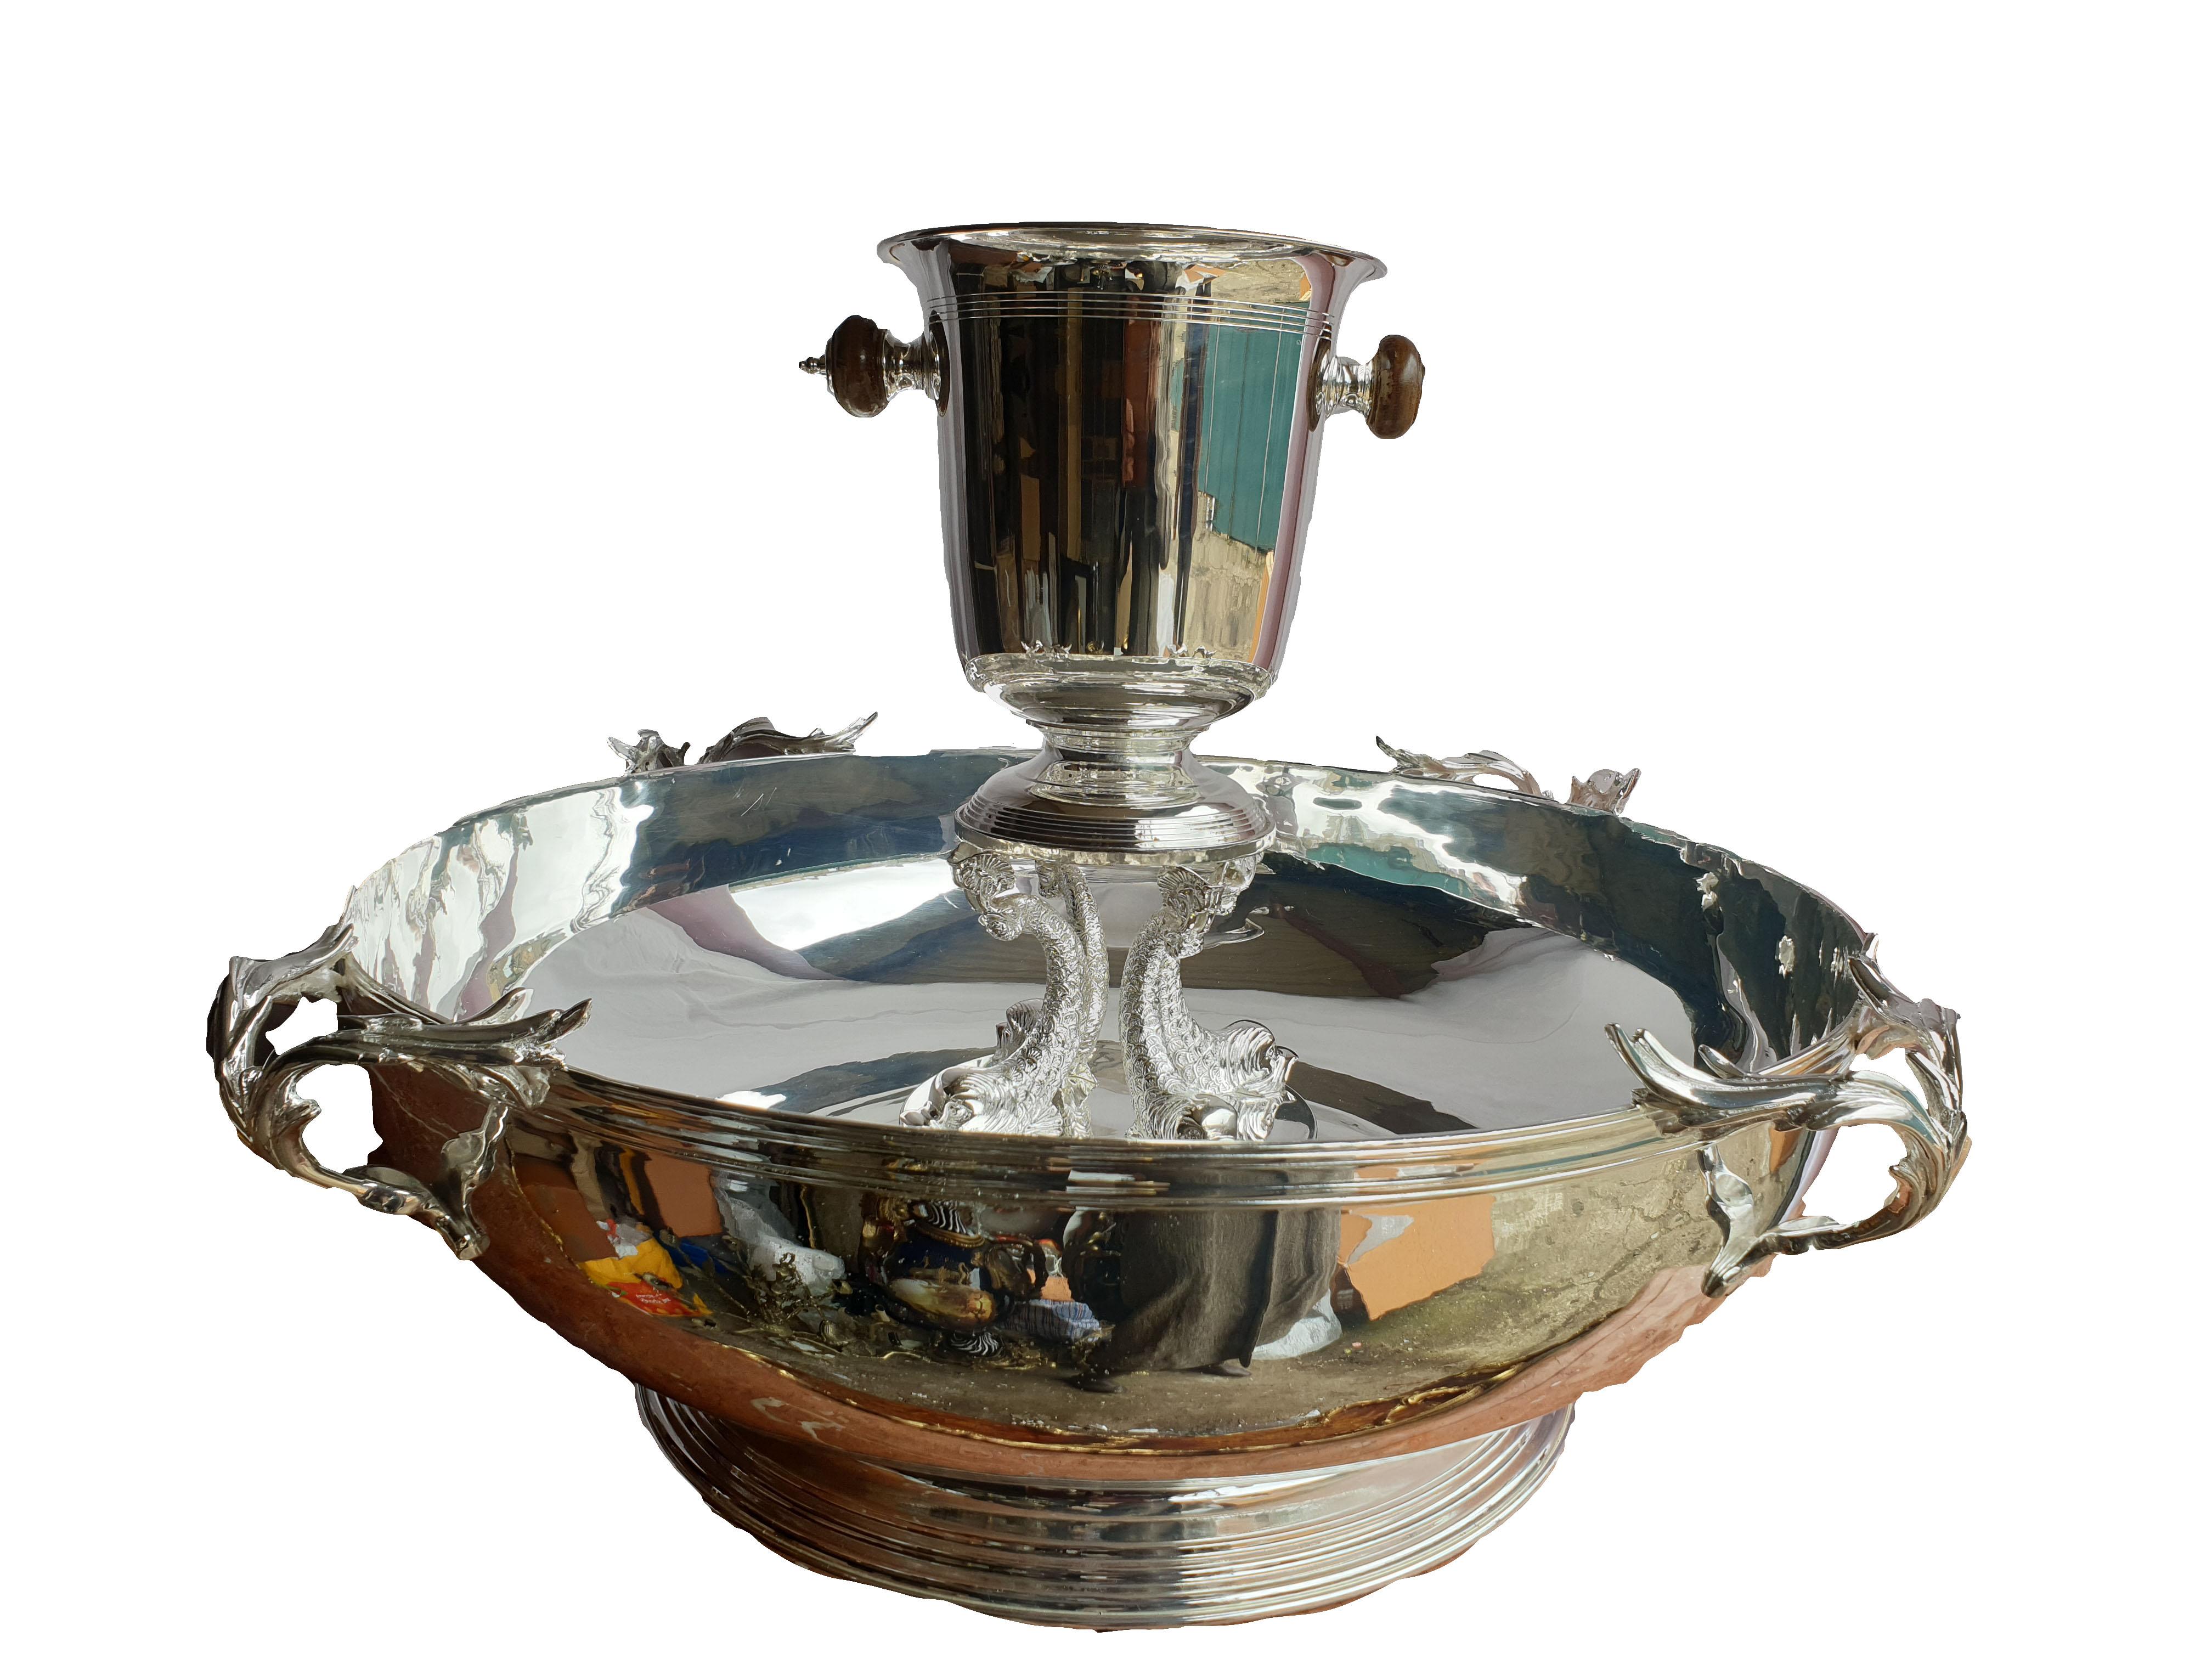 A monumental Sheffield made 12 bottle silver plated champagne cooler. Decorated with branches as handles and a ribbed bottom, mounted with a fish central piece and an additional ice bucket on top. Golden medallion can be engraved and stuck on the